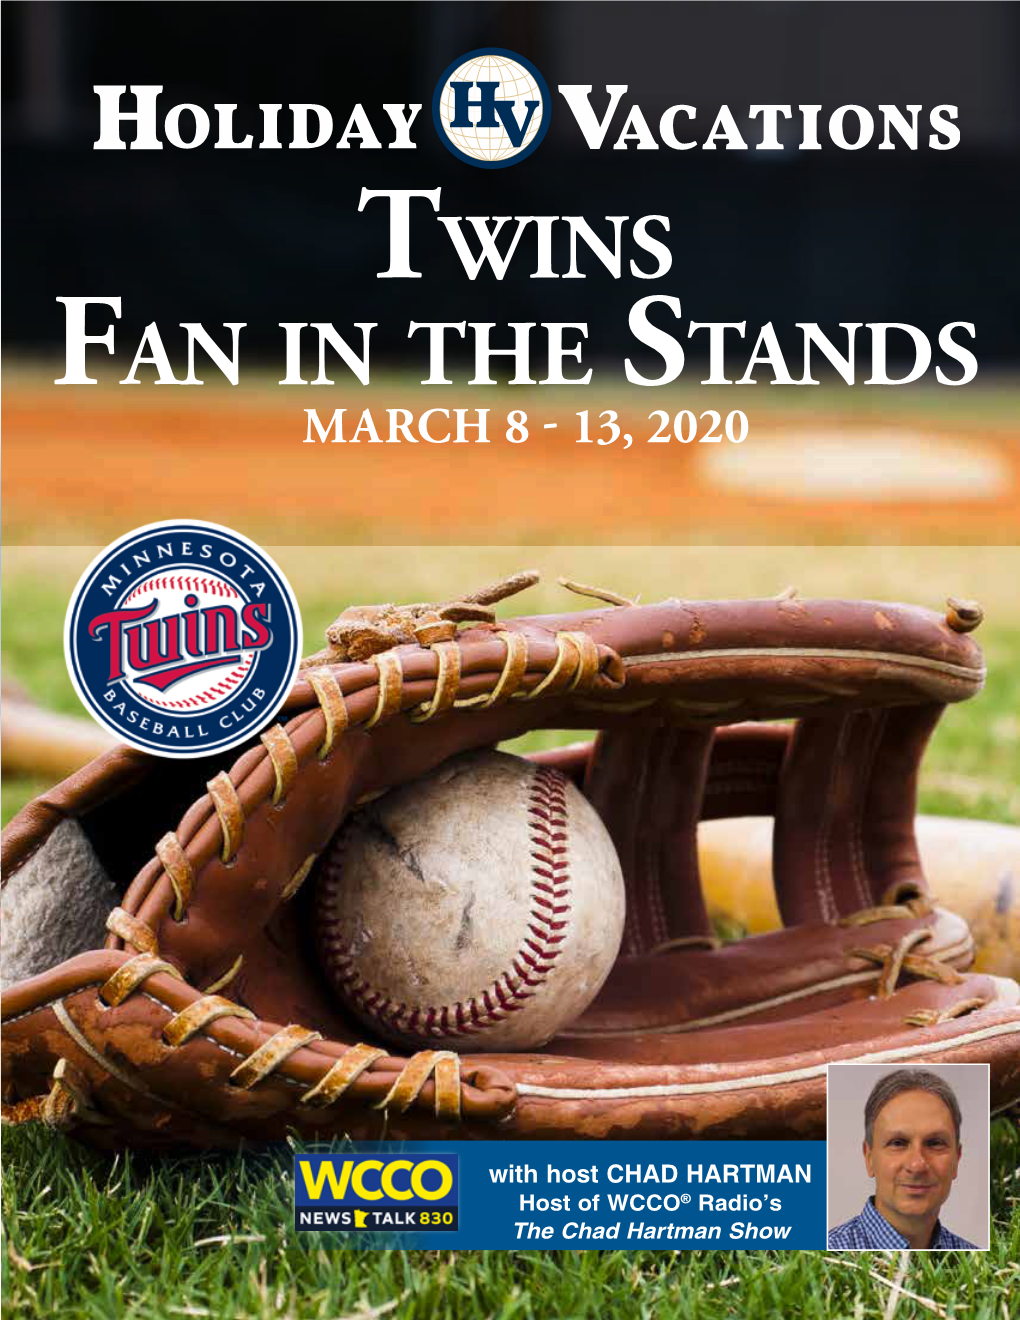 Twins Fan in the Stands MARCH 8 - 13, 2020